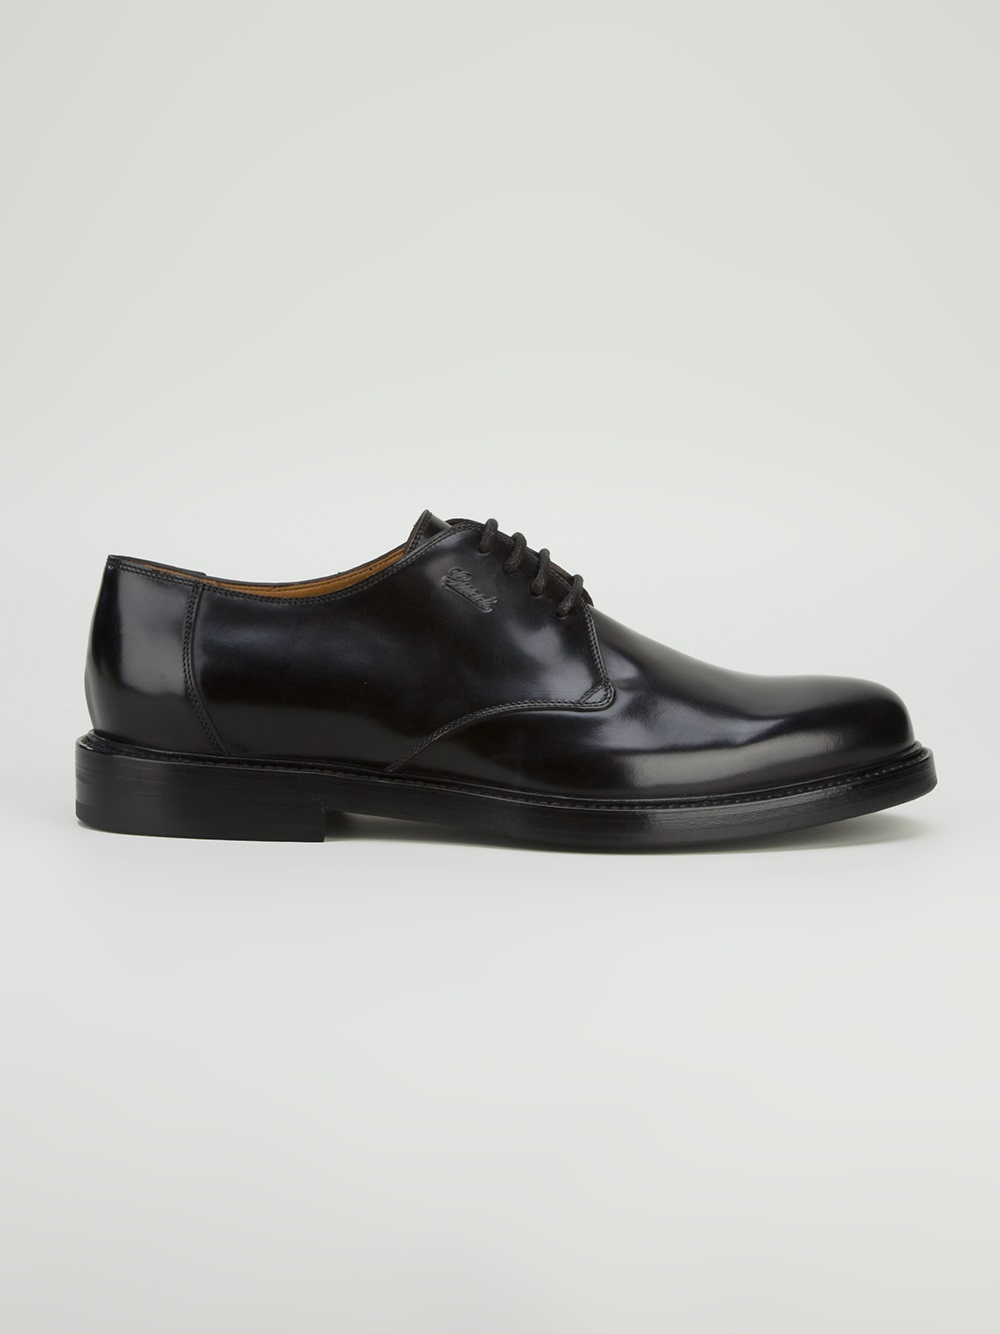 Lyst - Gucci Chunky Derby Shoe in Black for Men